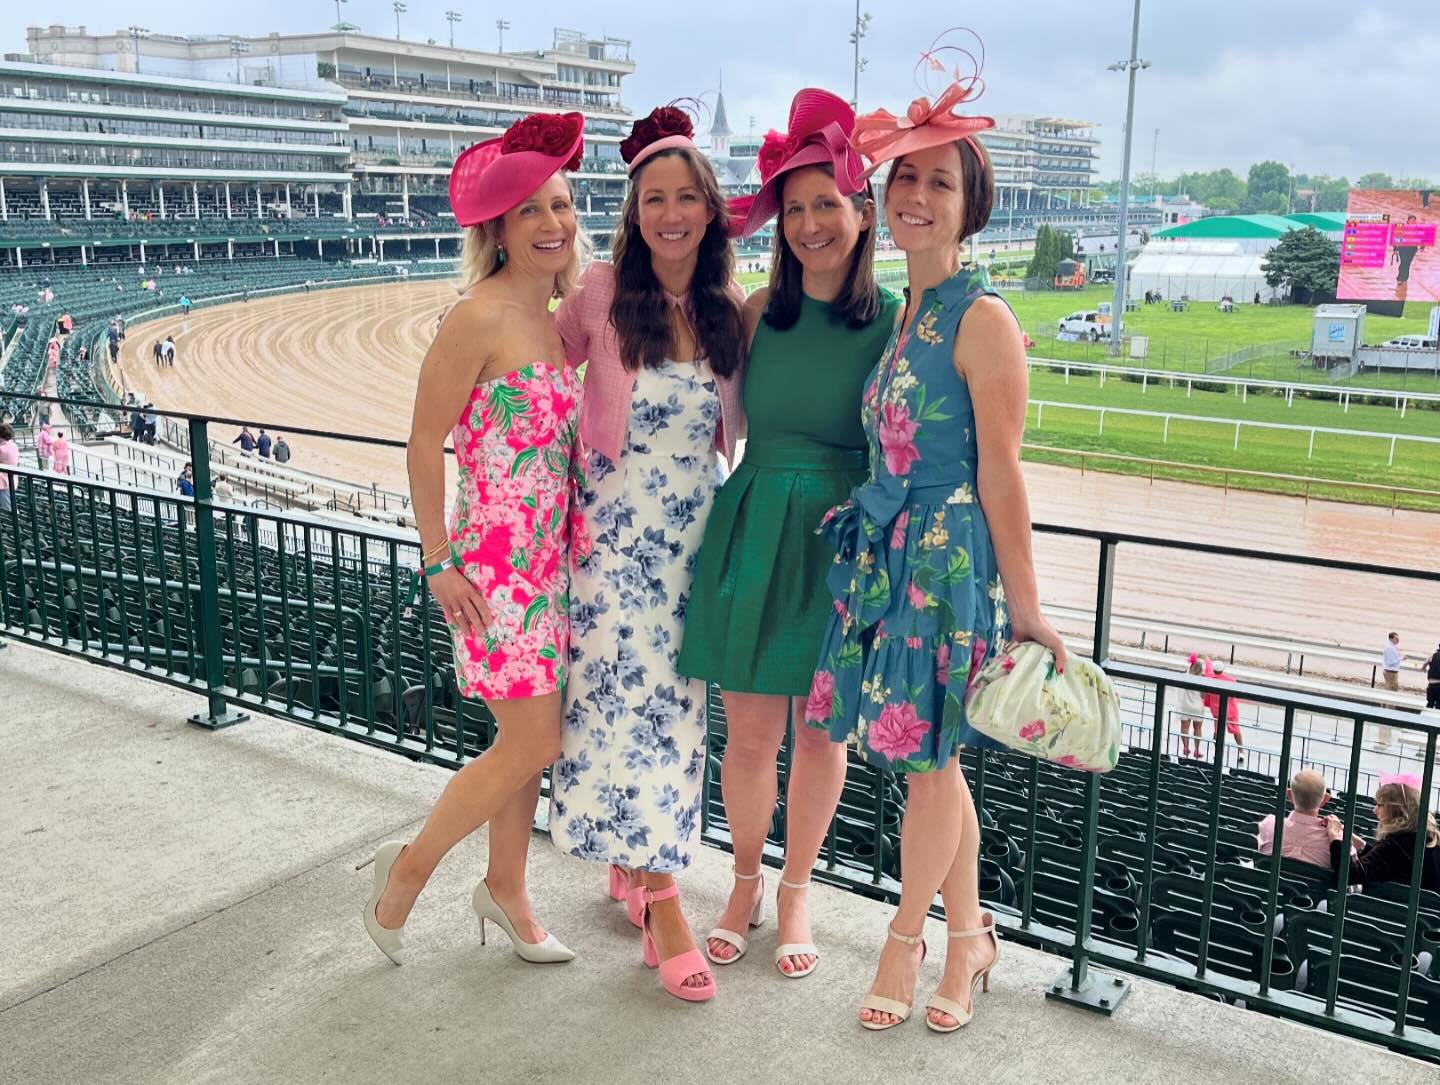 🐎So much fun was had at the Kentucky Derby 🐎

We had the BEST time celebrating @margaret_daley&rsquo;s bachelorette!!